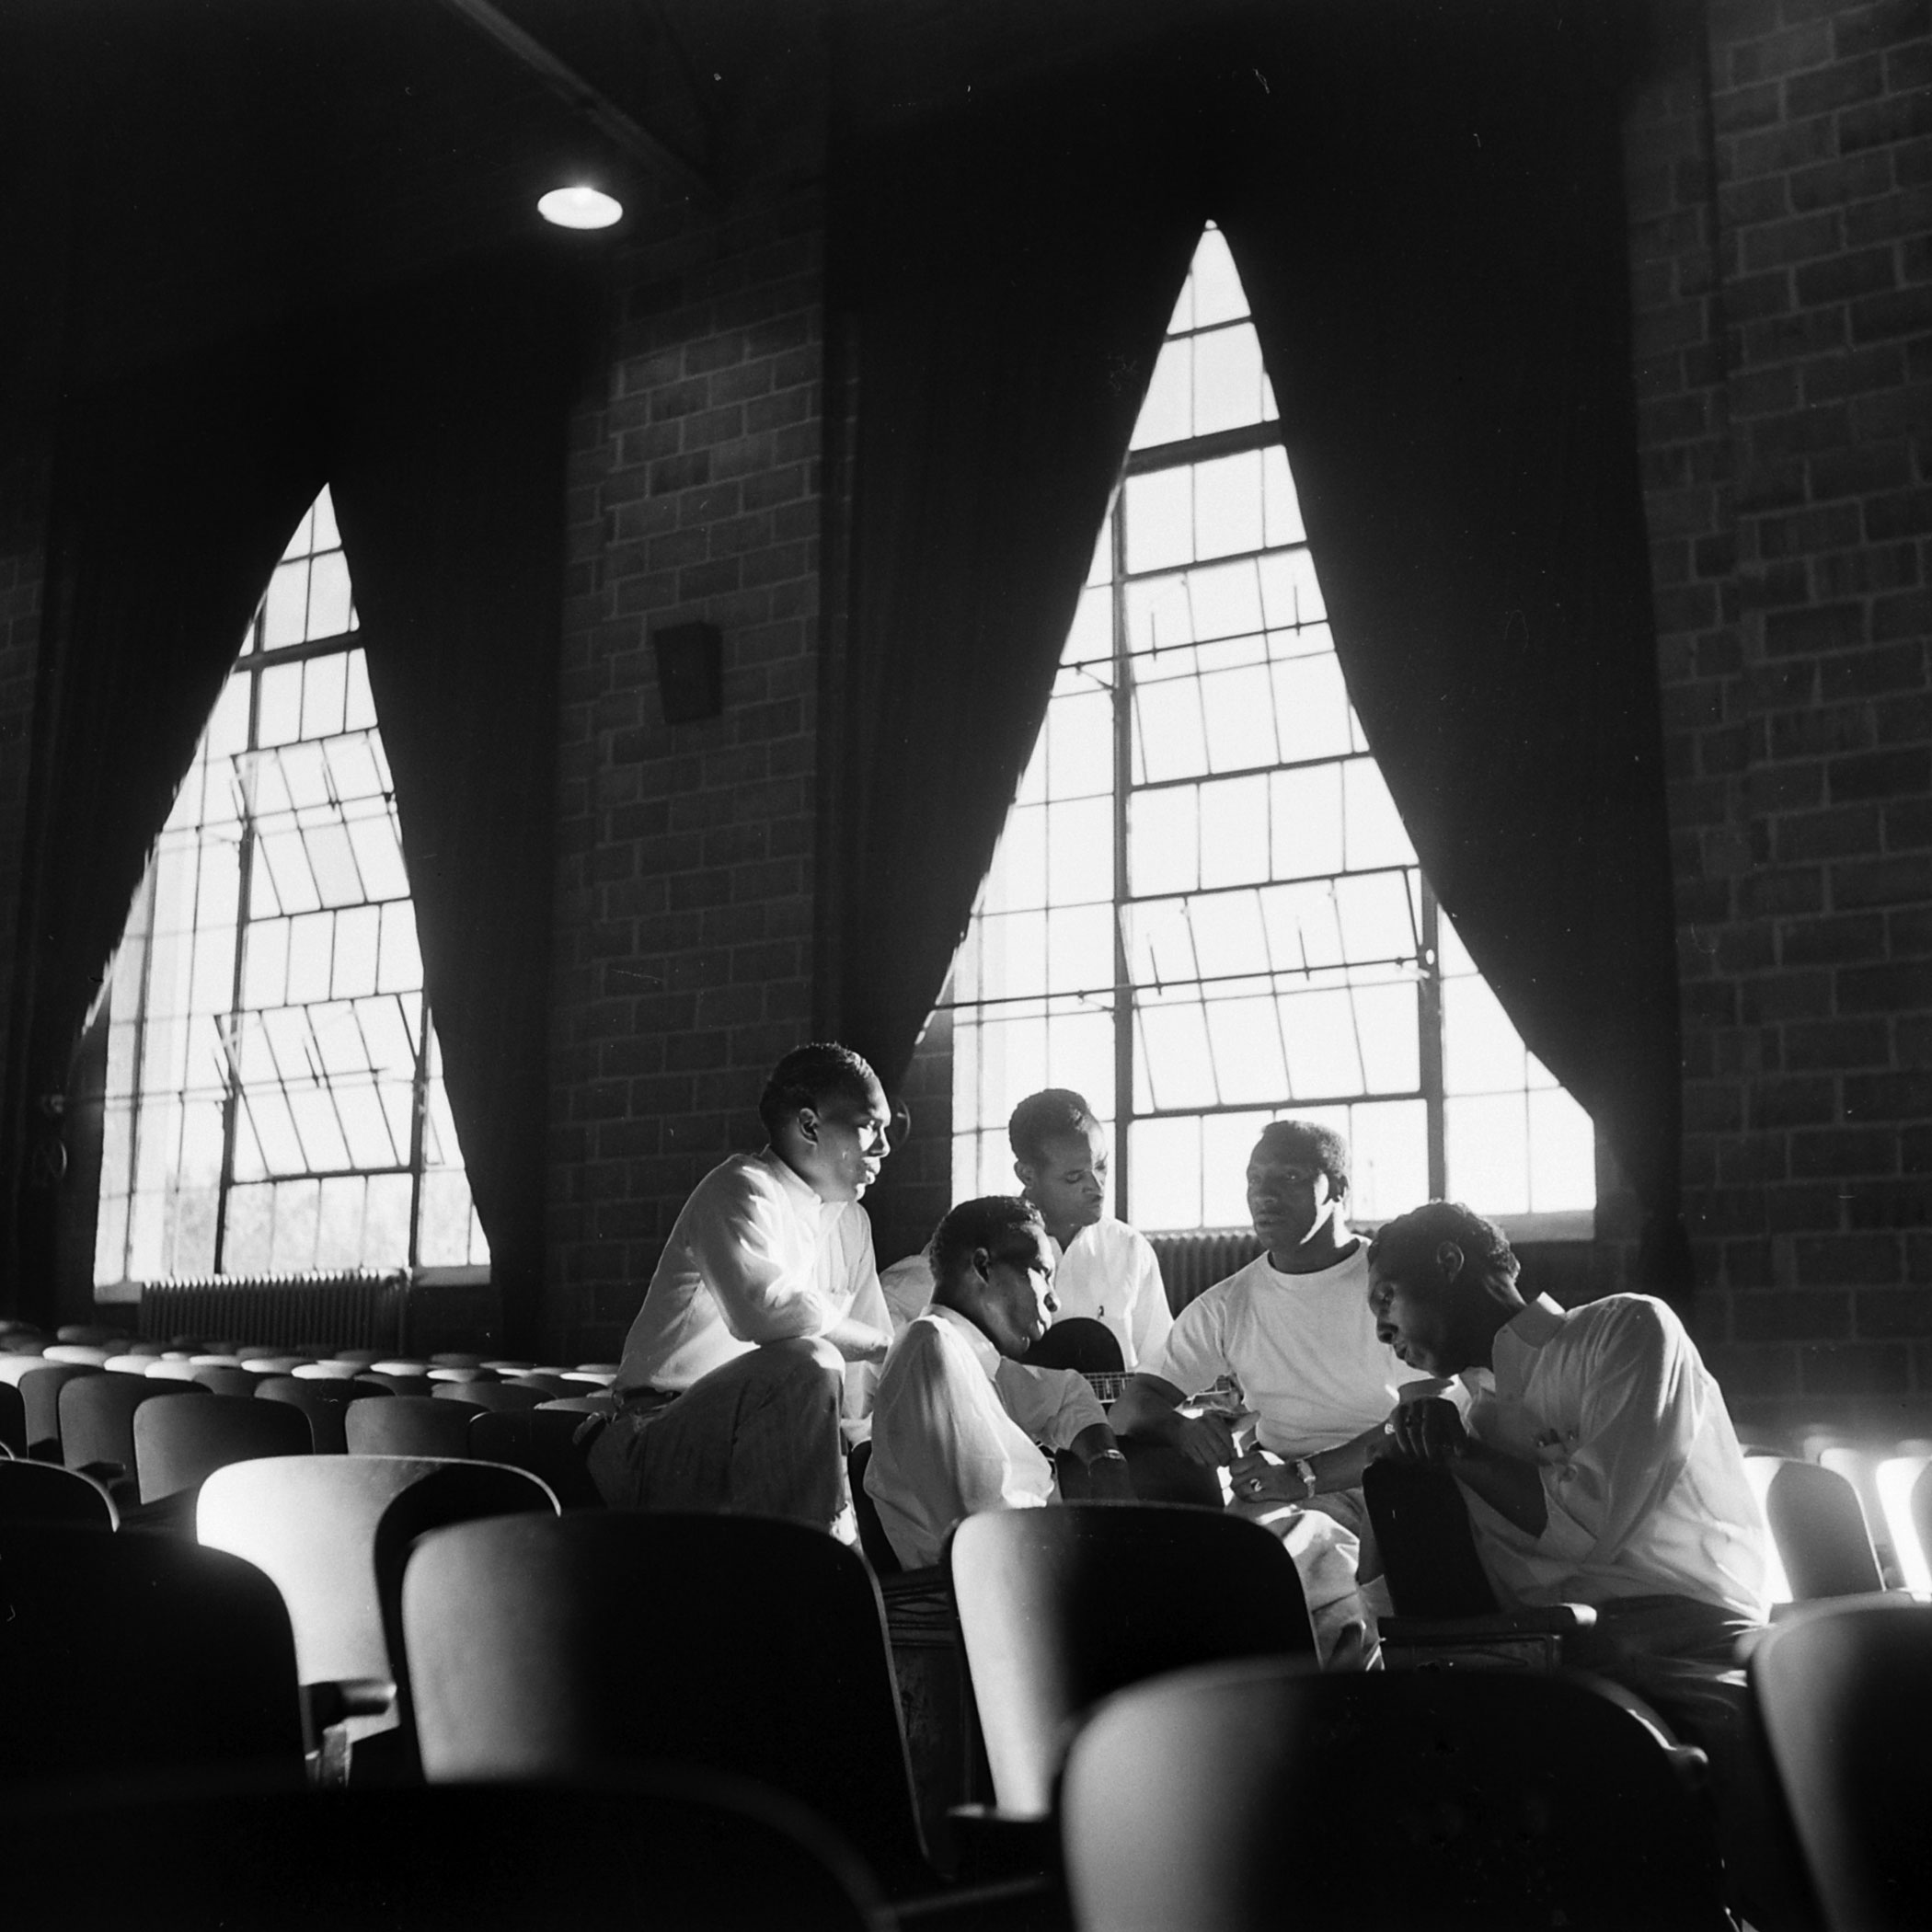 Members of the incarcerated musical group the Prisonaires rehearse in the prison auditorium, Tennessee, 1953.